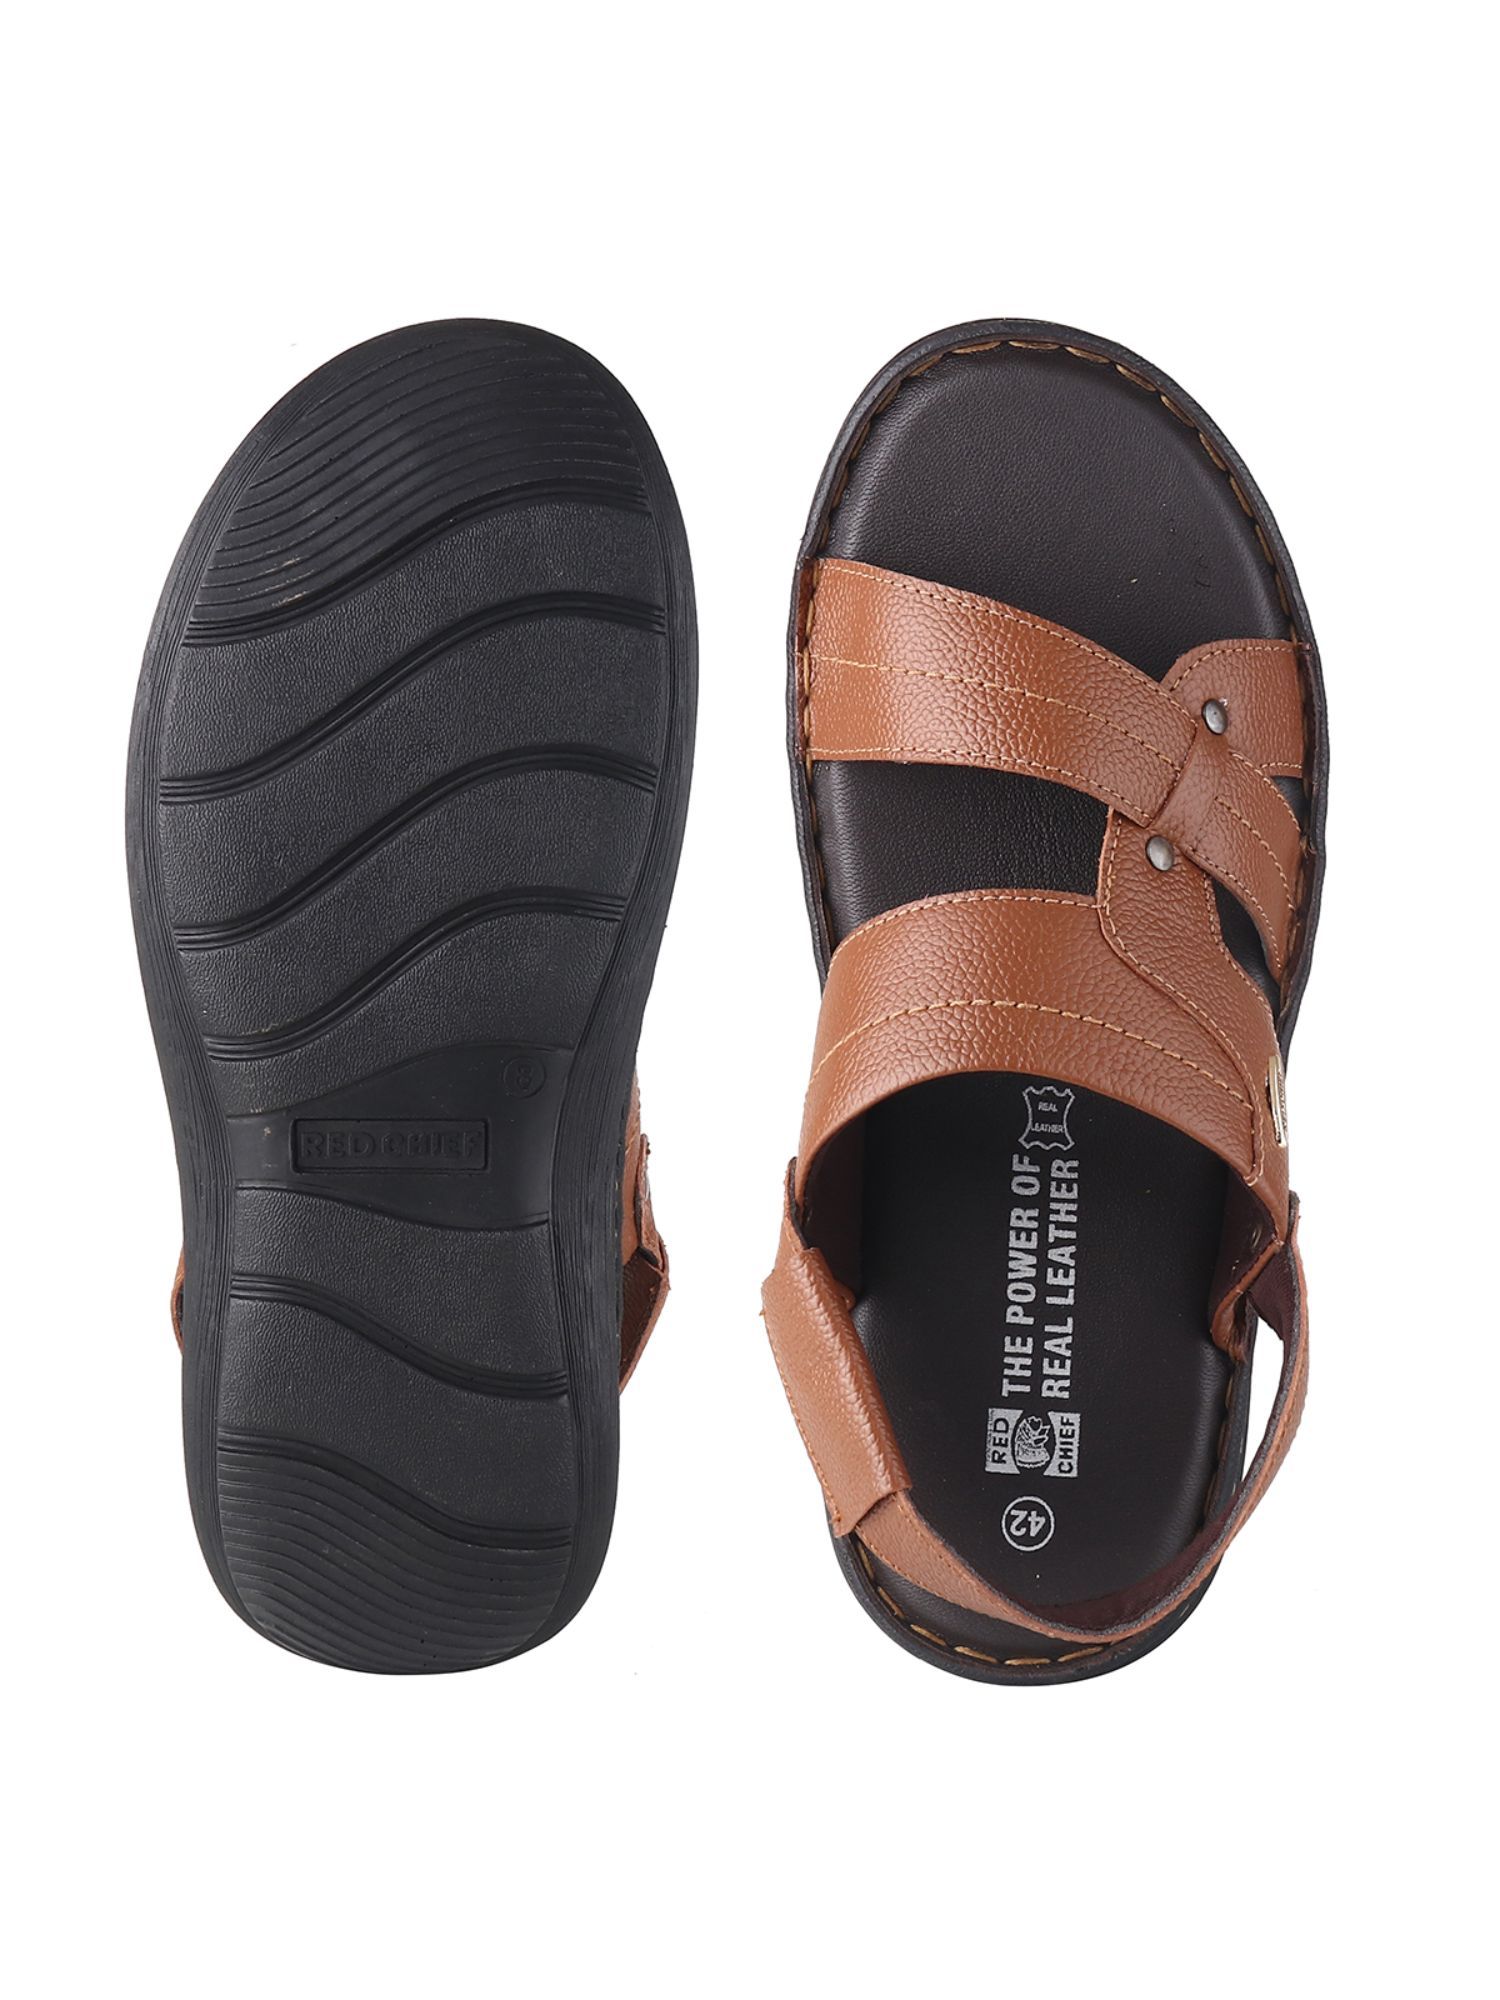 Red Chief Black Leather slippers and sandals for men : Amazon.in: Fashion